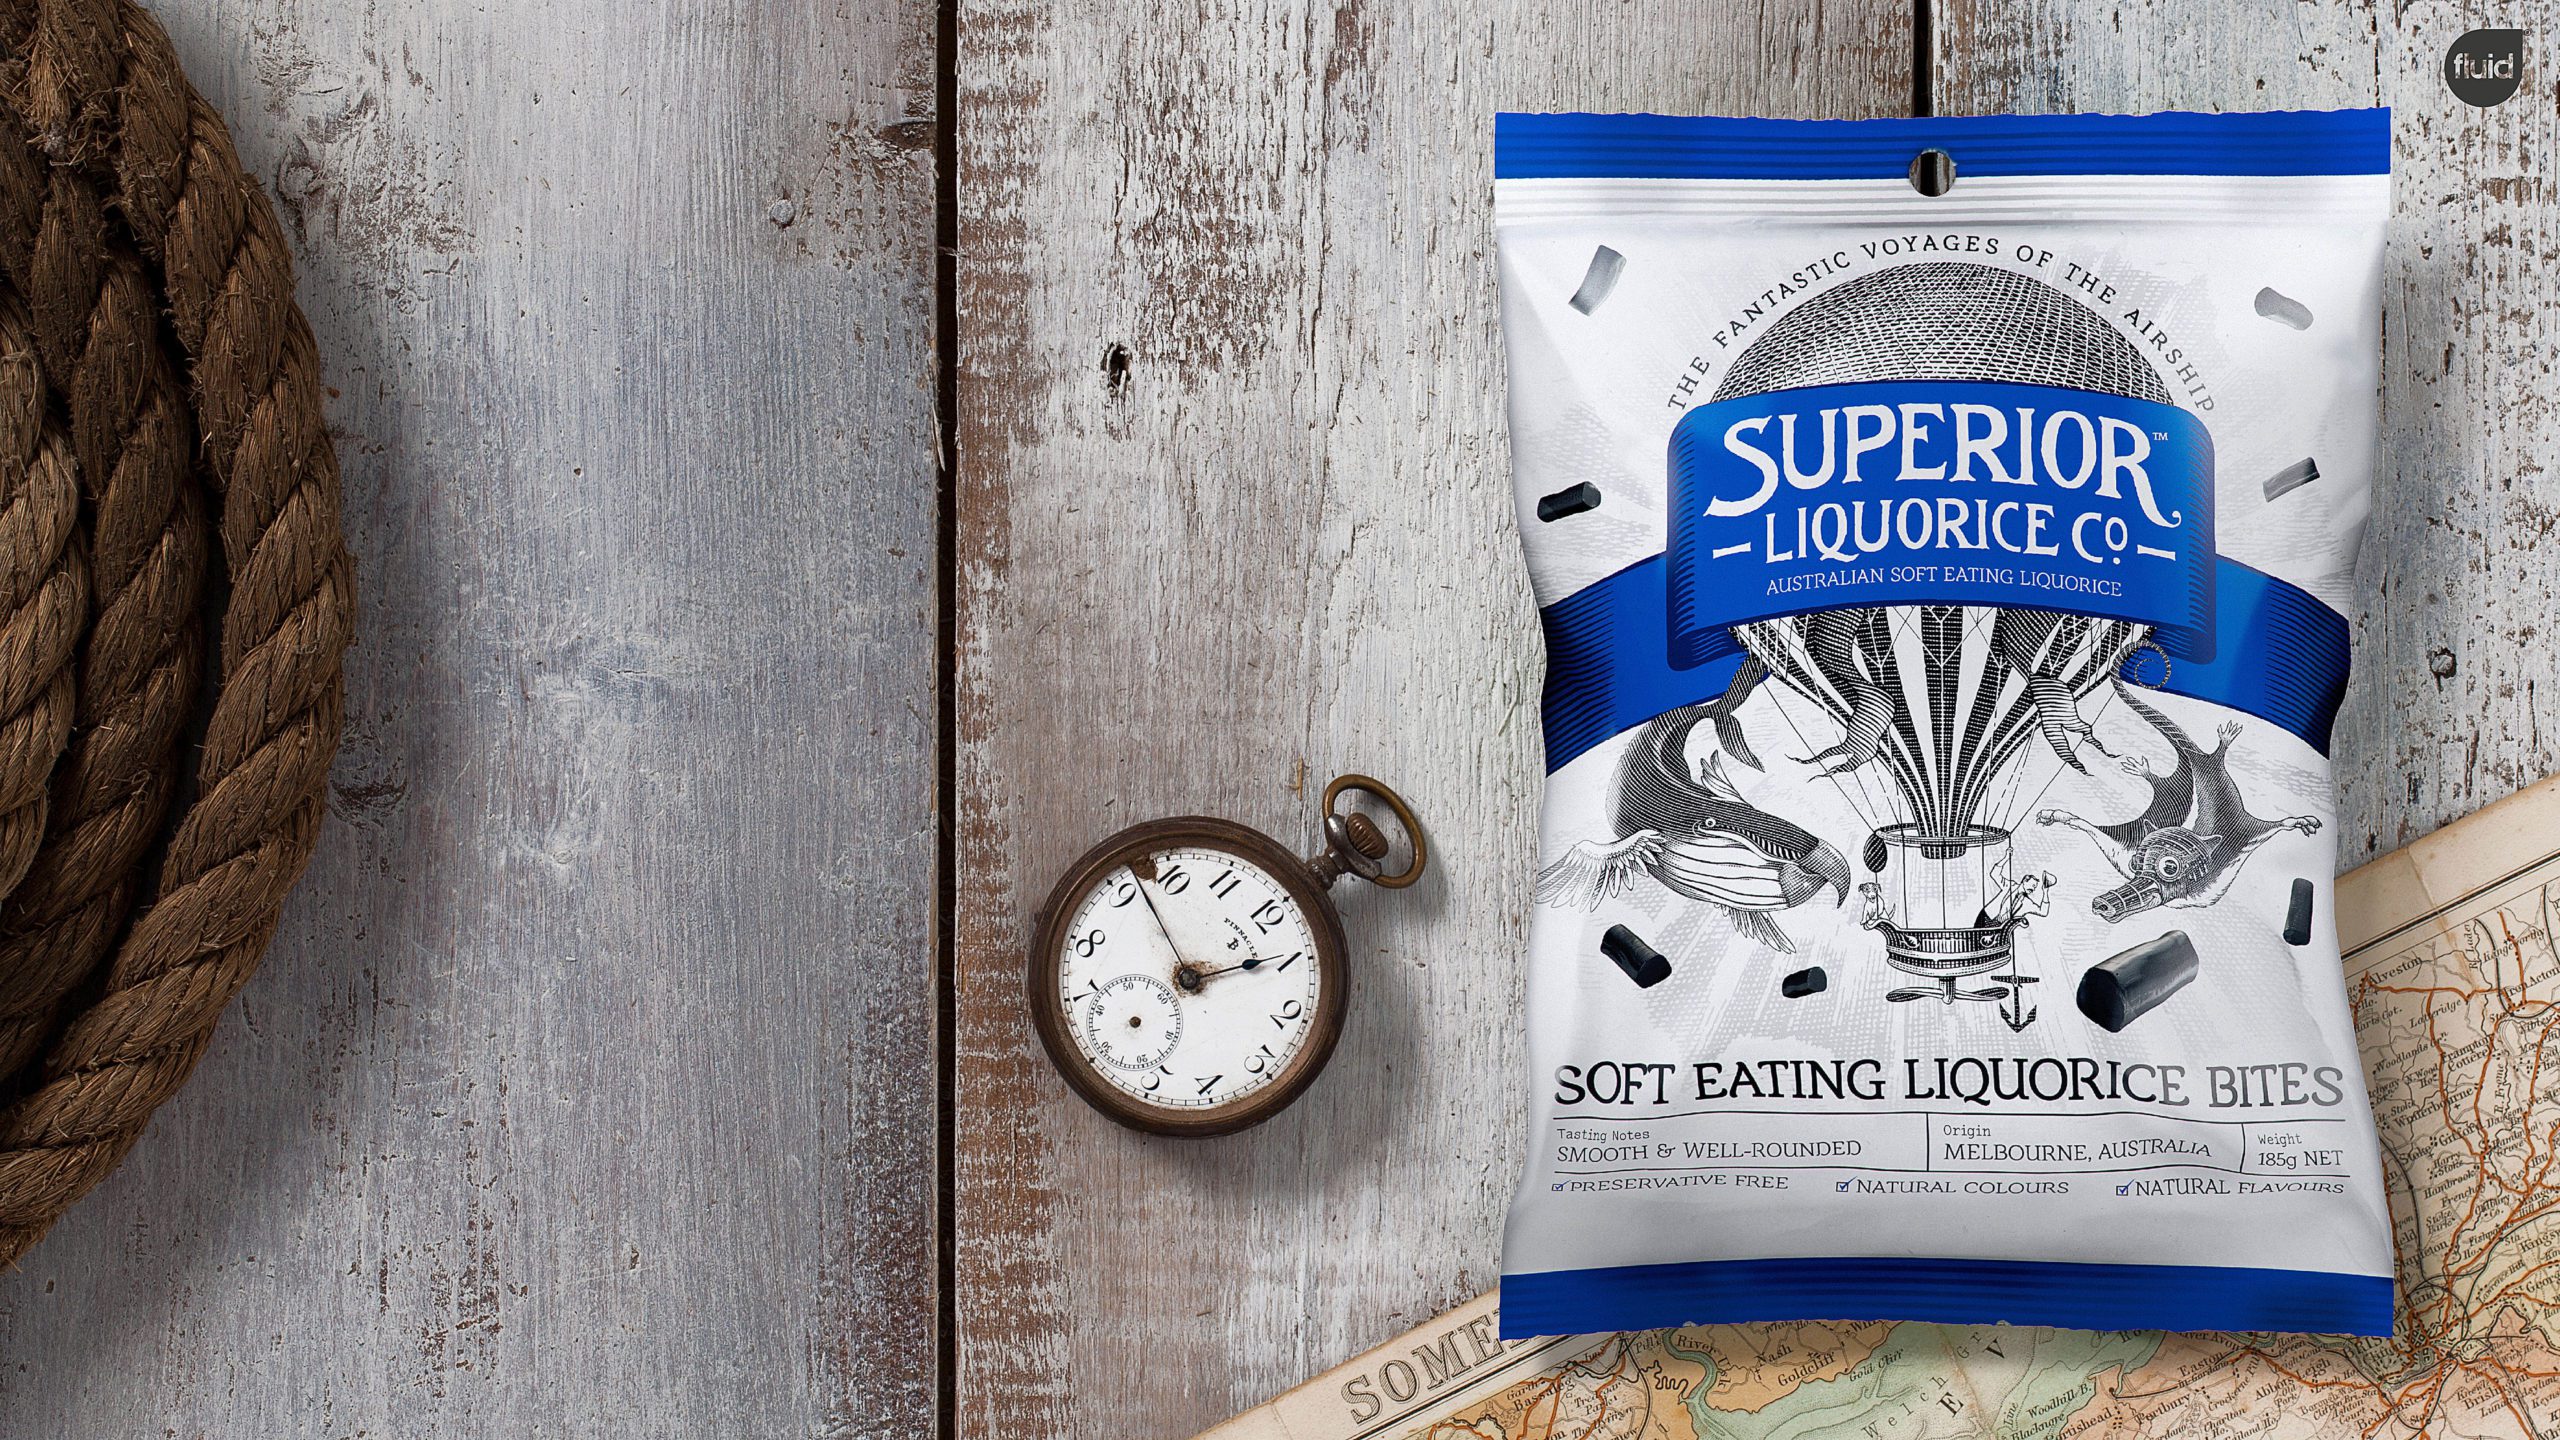 Superior Liquorice Co soft eating liquorice bites product packaging, resting on a wooden surface next to vintage pocket watch and map.